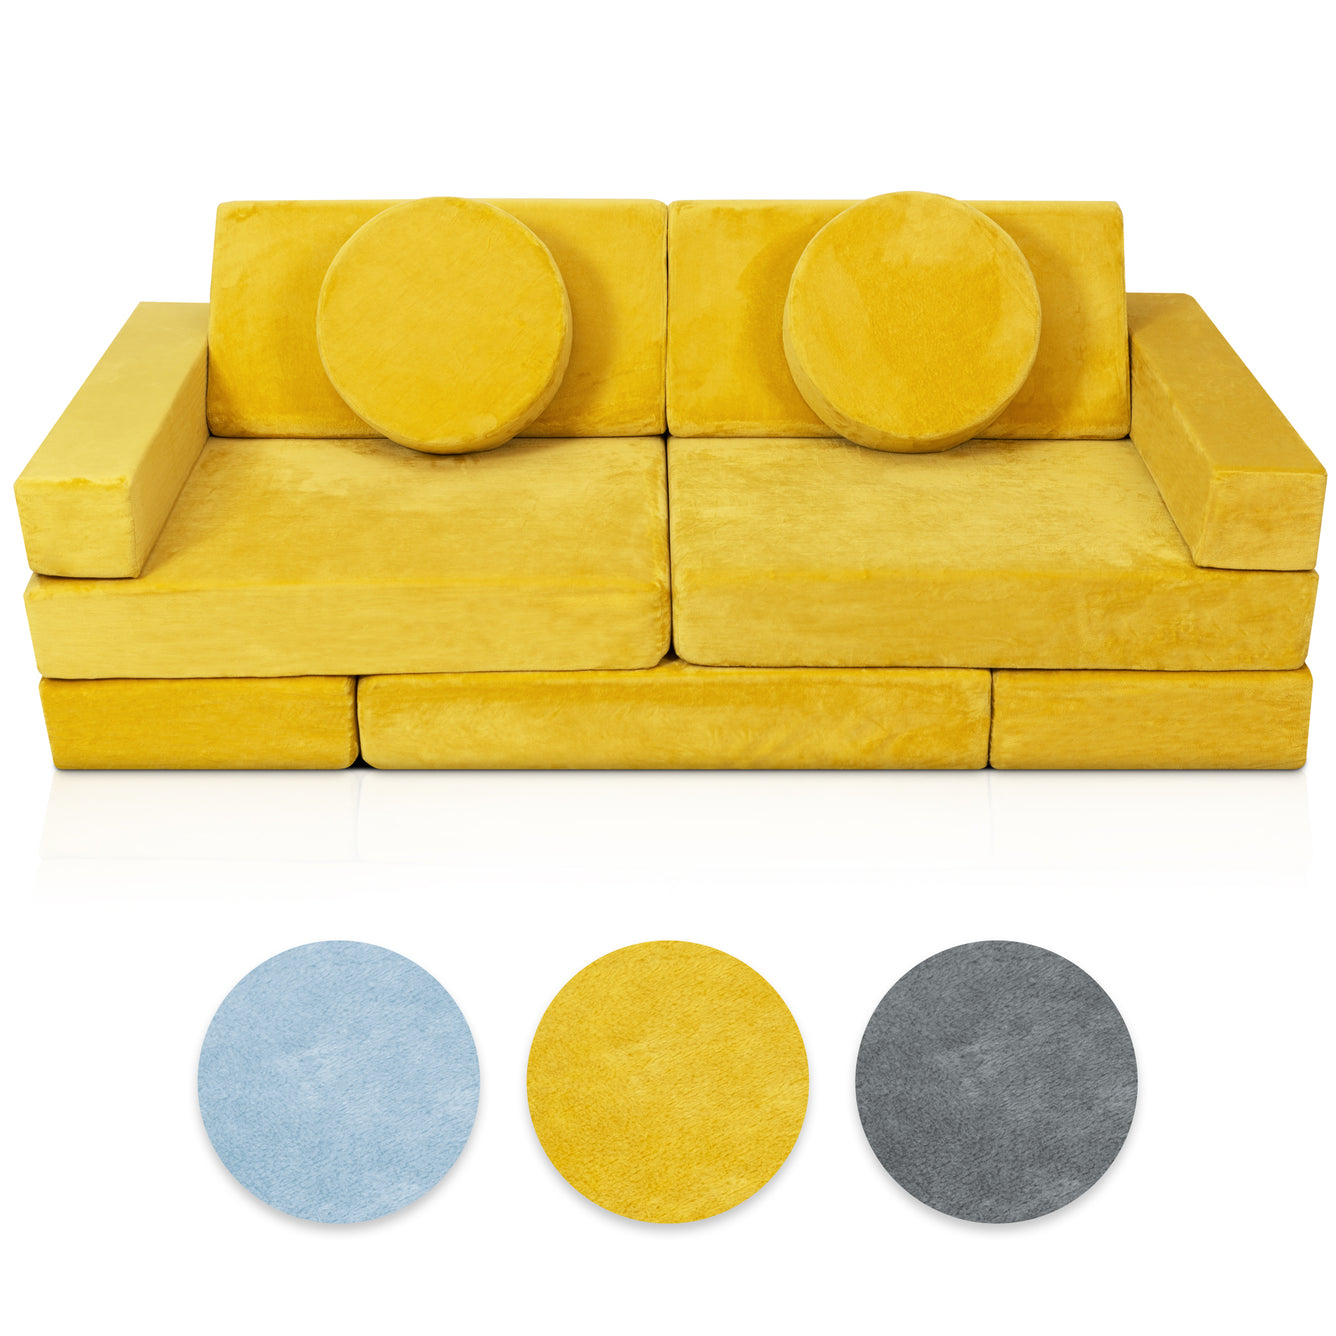 Lunix 14pcs Modular Kids Play Couch - Cover Set Only for LX15, Yellow, Foam not Included